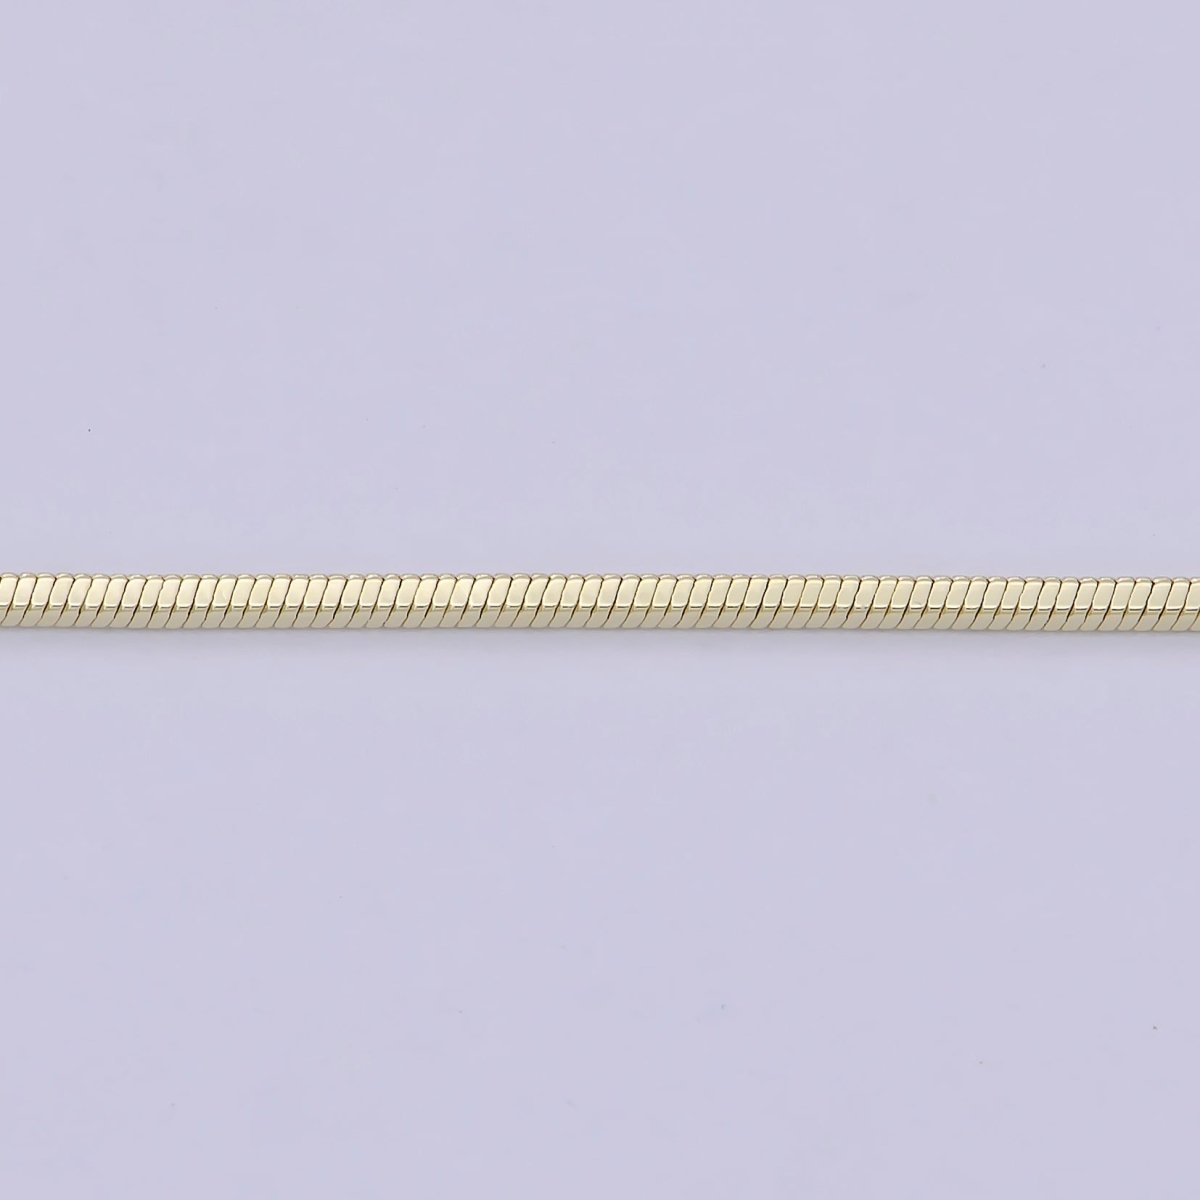 Dainty Gold Snake Chain 1 MM Round 17.7" Ready To Wear Chain Wholesale Necklace | WA-752 Clearance Pricing - DLUXCA